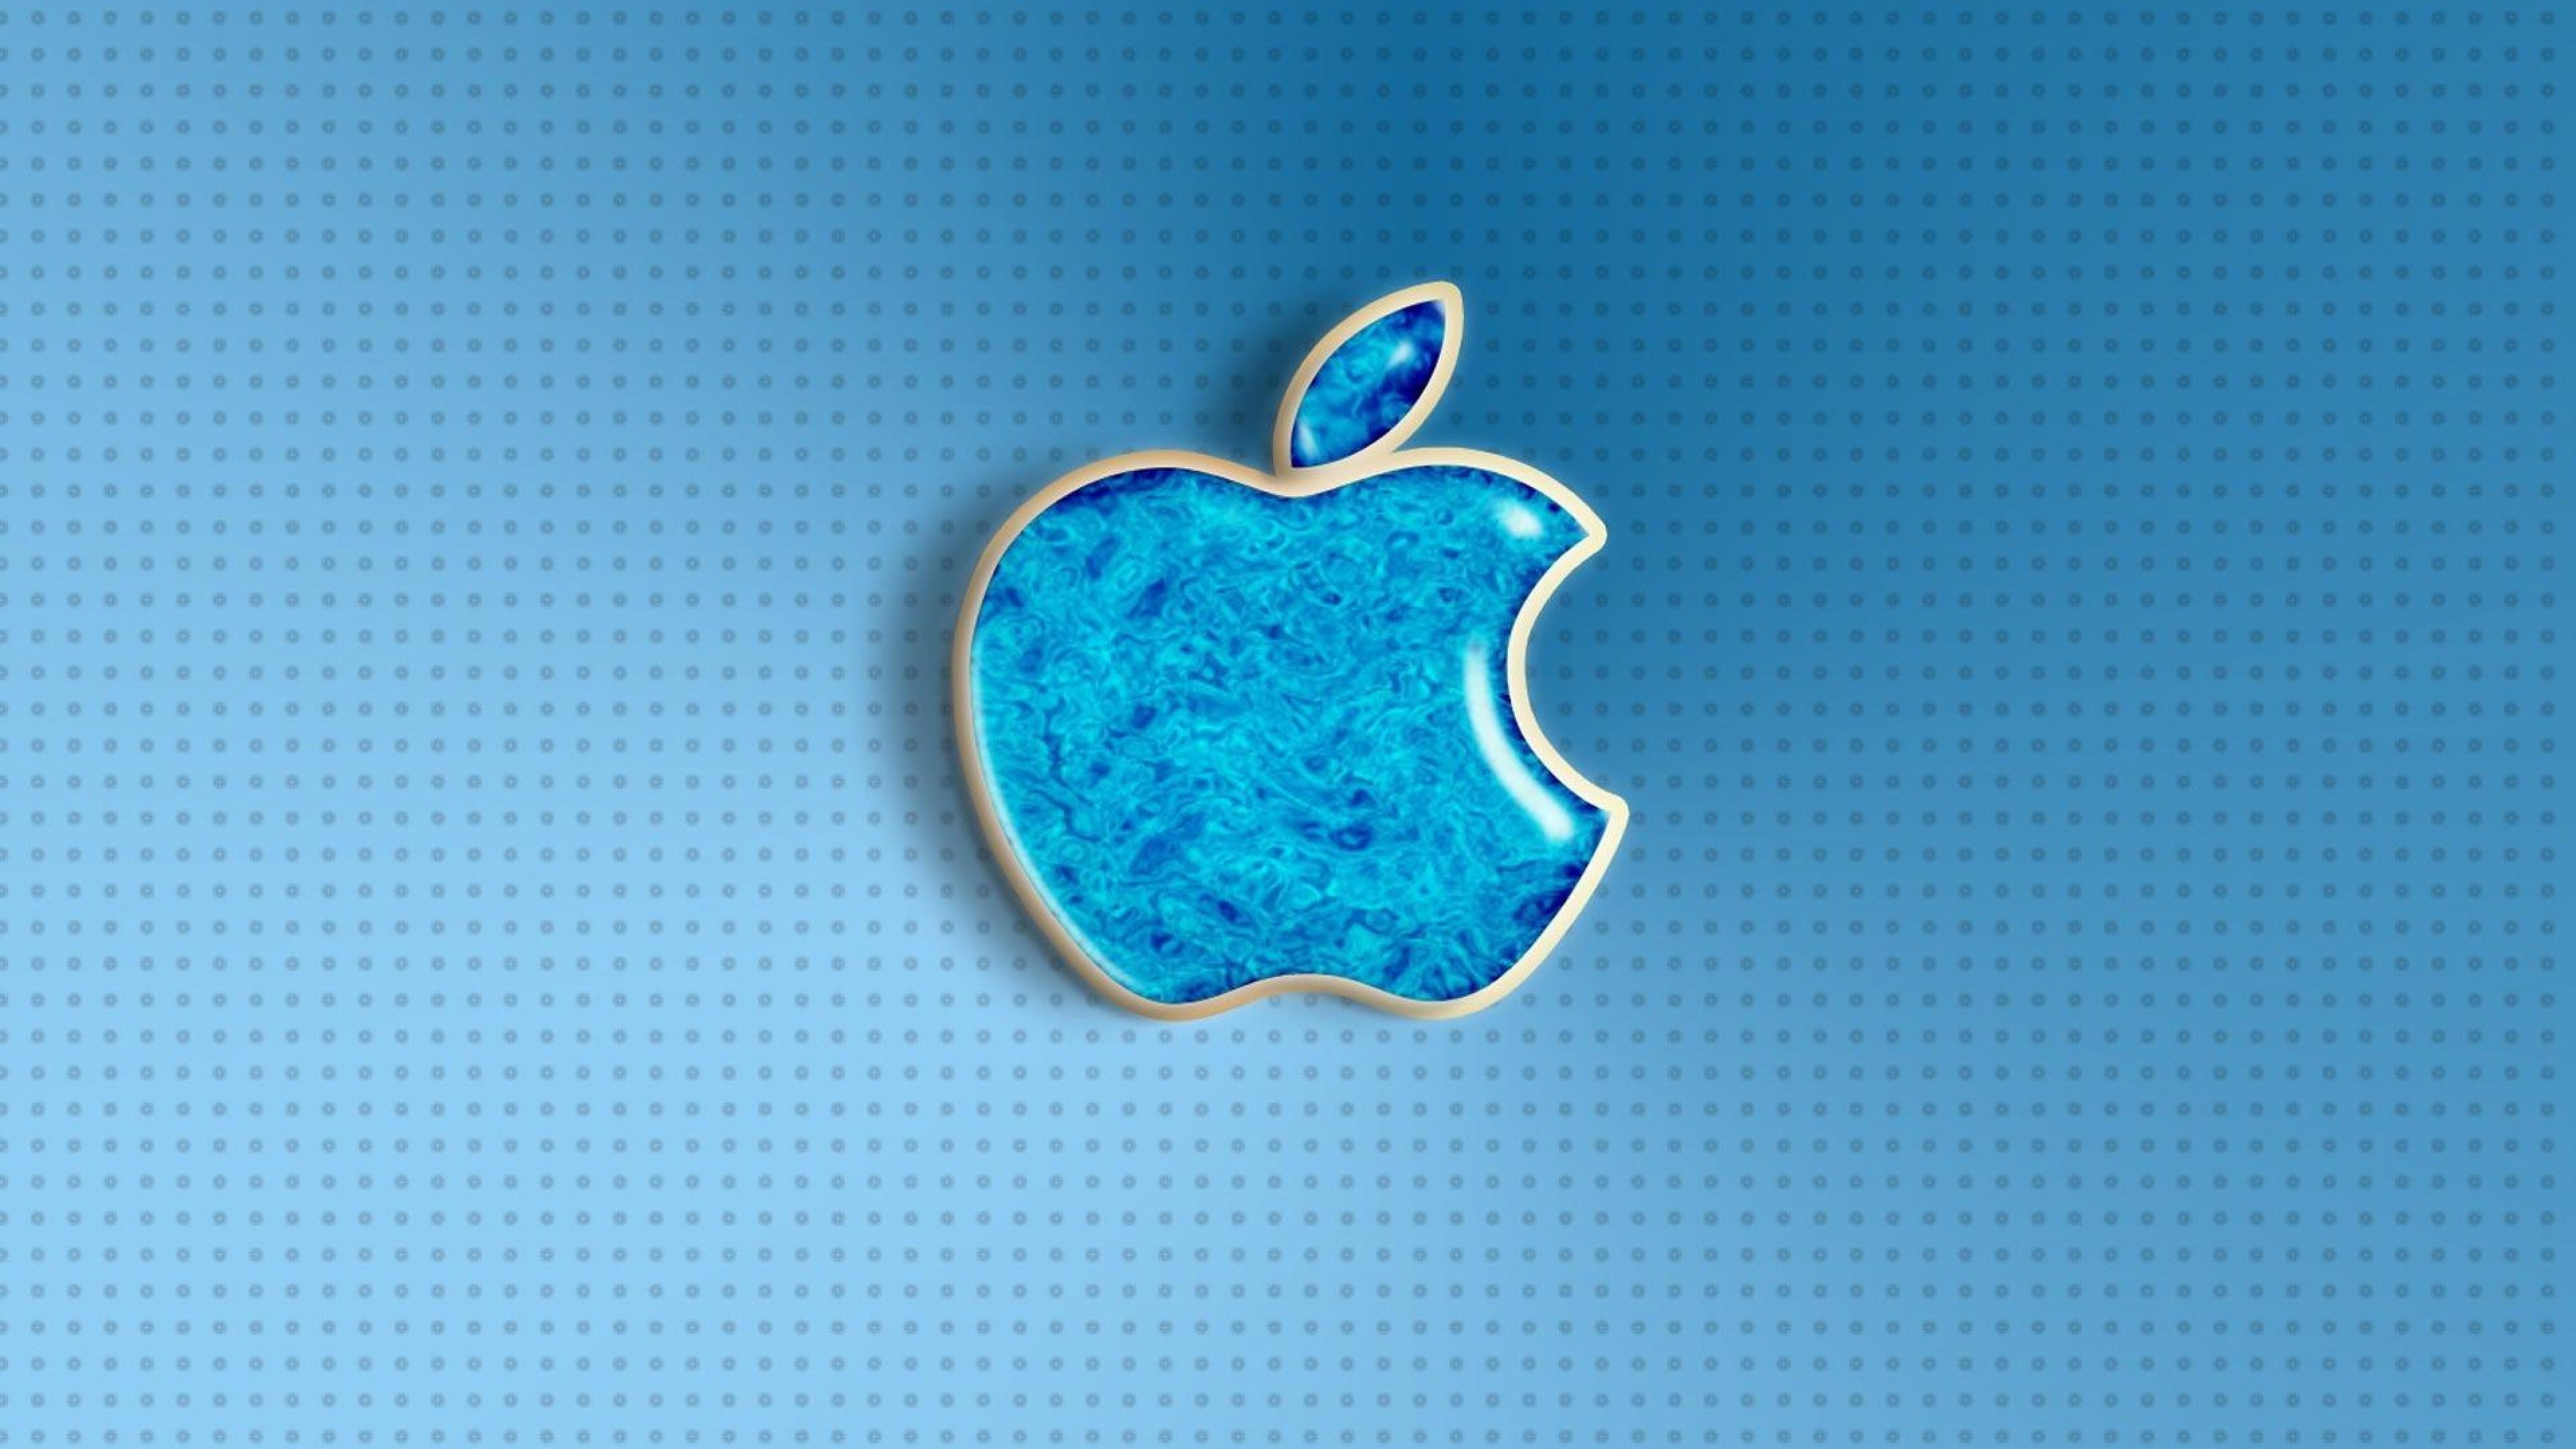 3840x2160 ... Blue Apple Backgrounds | HD Wallpapers Backgrounds of Your Choice